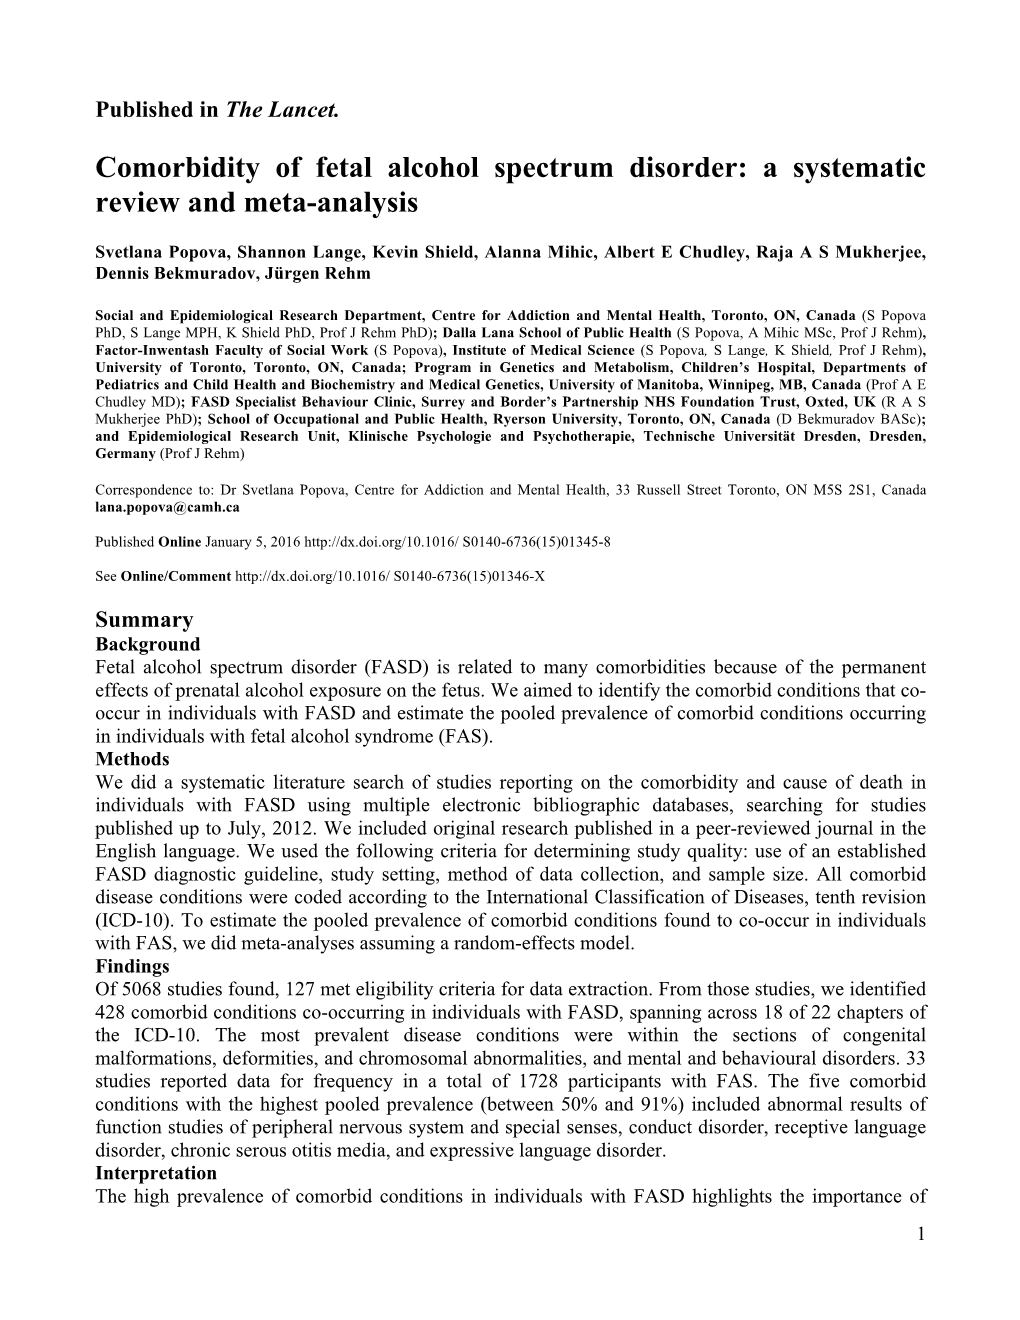 Comorbidity of Fetal Alcohol Spectrum Disorder: a Systematic Review and Meta-Analysis